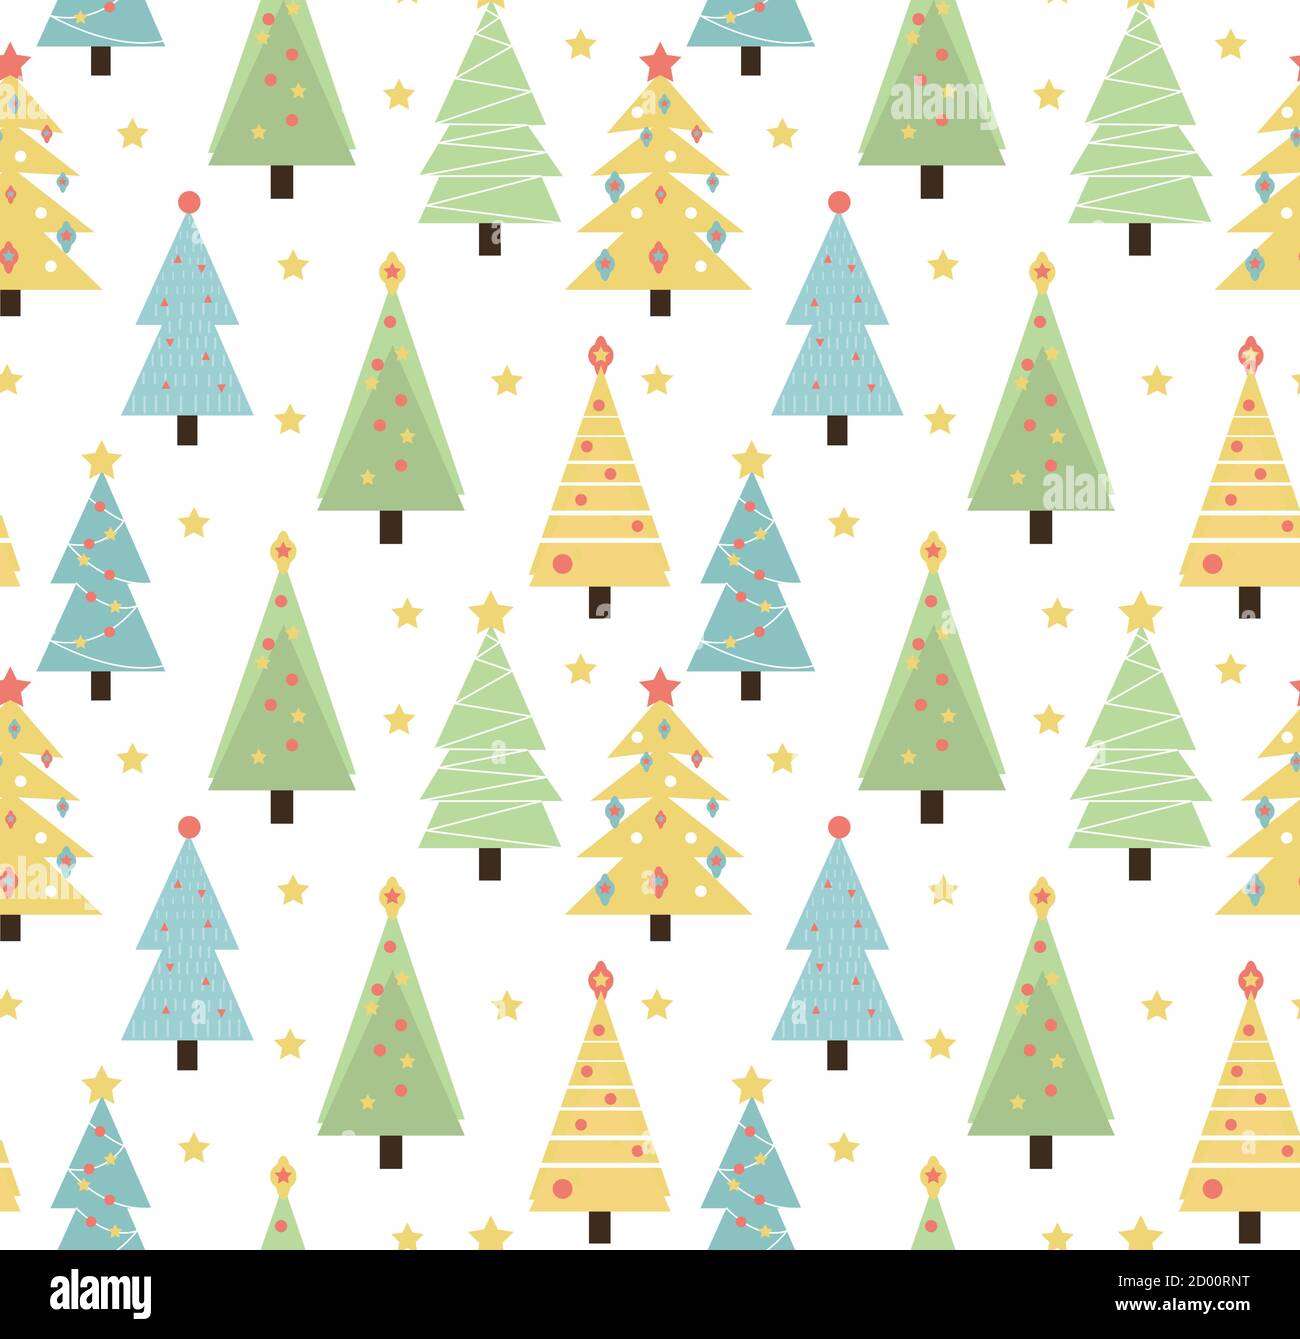 Merry christmas seamless pattern. Cute Christmas trees texture background. Vector illustration Stock Vector